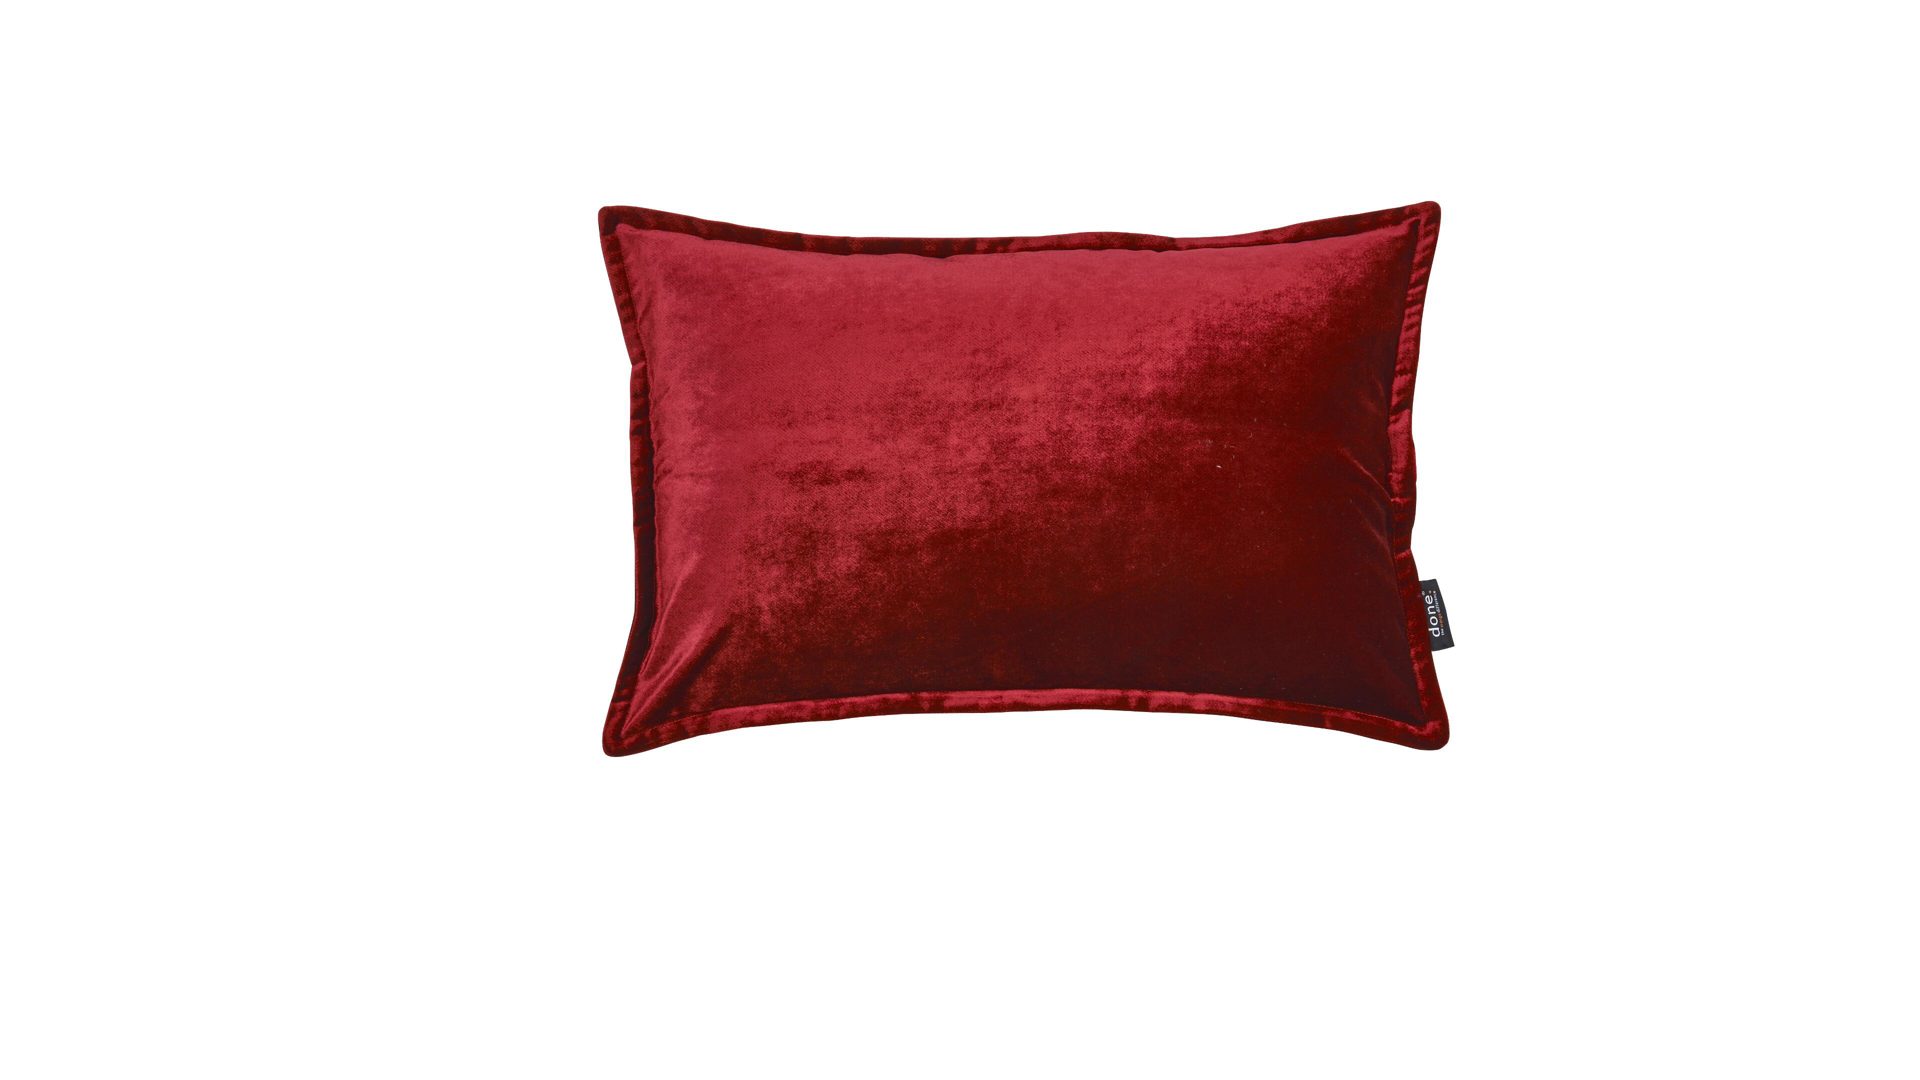 Kissenbezug /-hülle Done by karabel home company aus Stoff in Rot Done Kissenhülle Cushion Glam roter Samt – ca. 40 x 60 cm